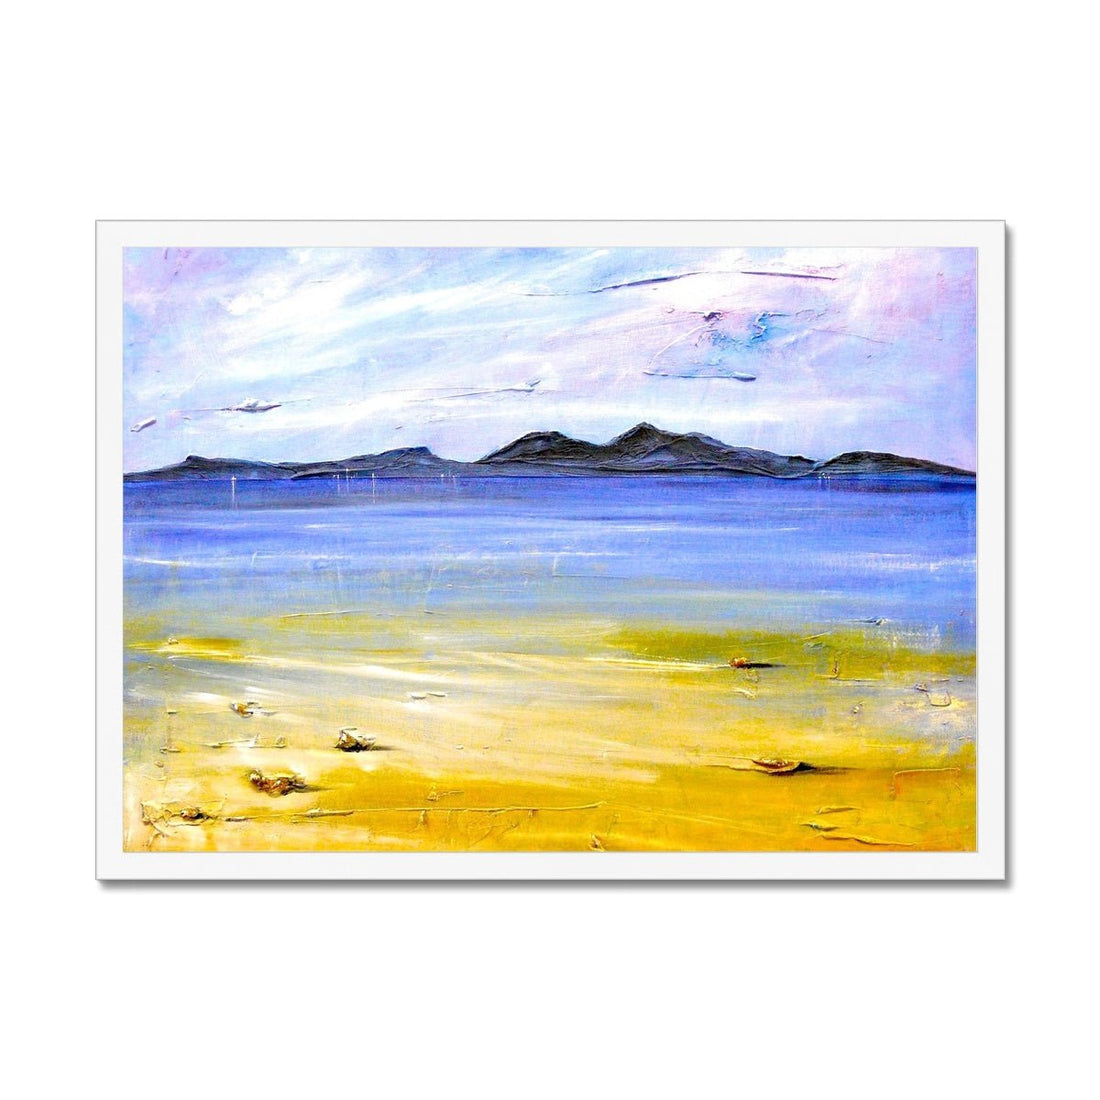 Camusdarach Beach Arisaig Painting | Framed Print | Paintings from Scotland by Scottish Artist Hunter